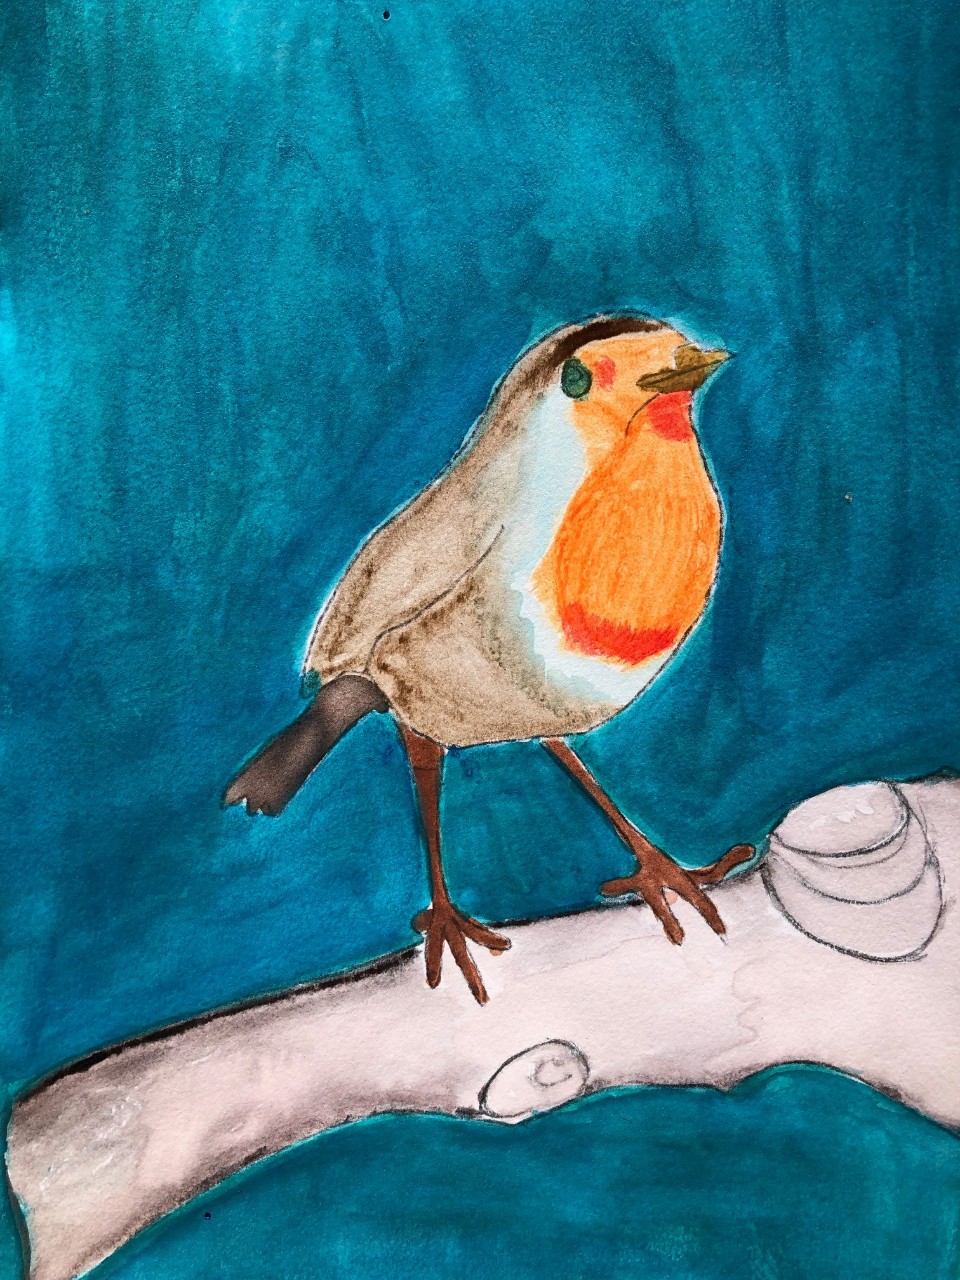 watercolor sketch of a brown, orange and white bird perched on the branch of a tree against a deep blue background